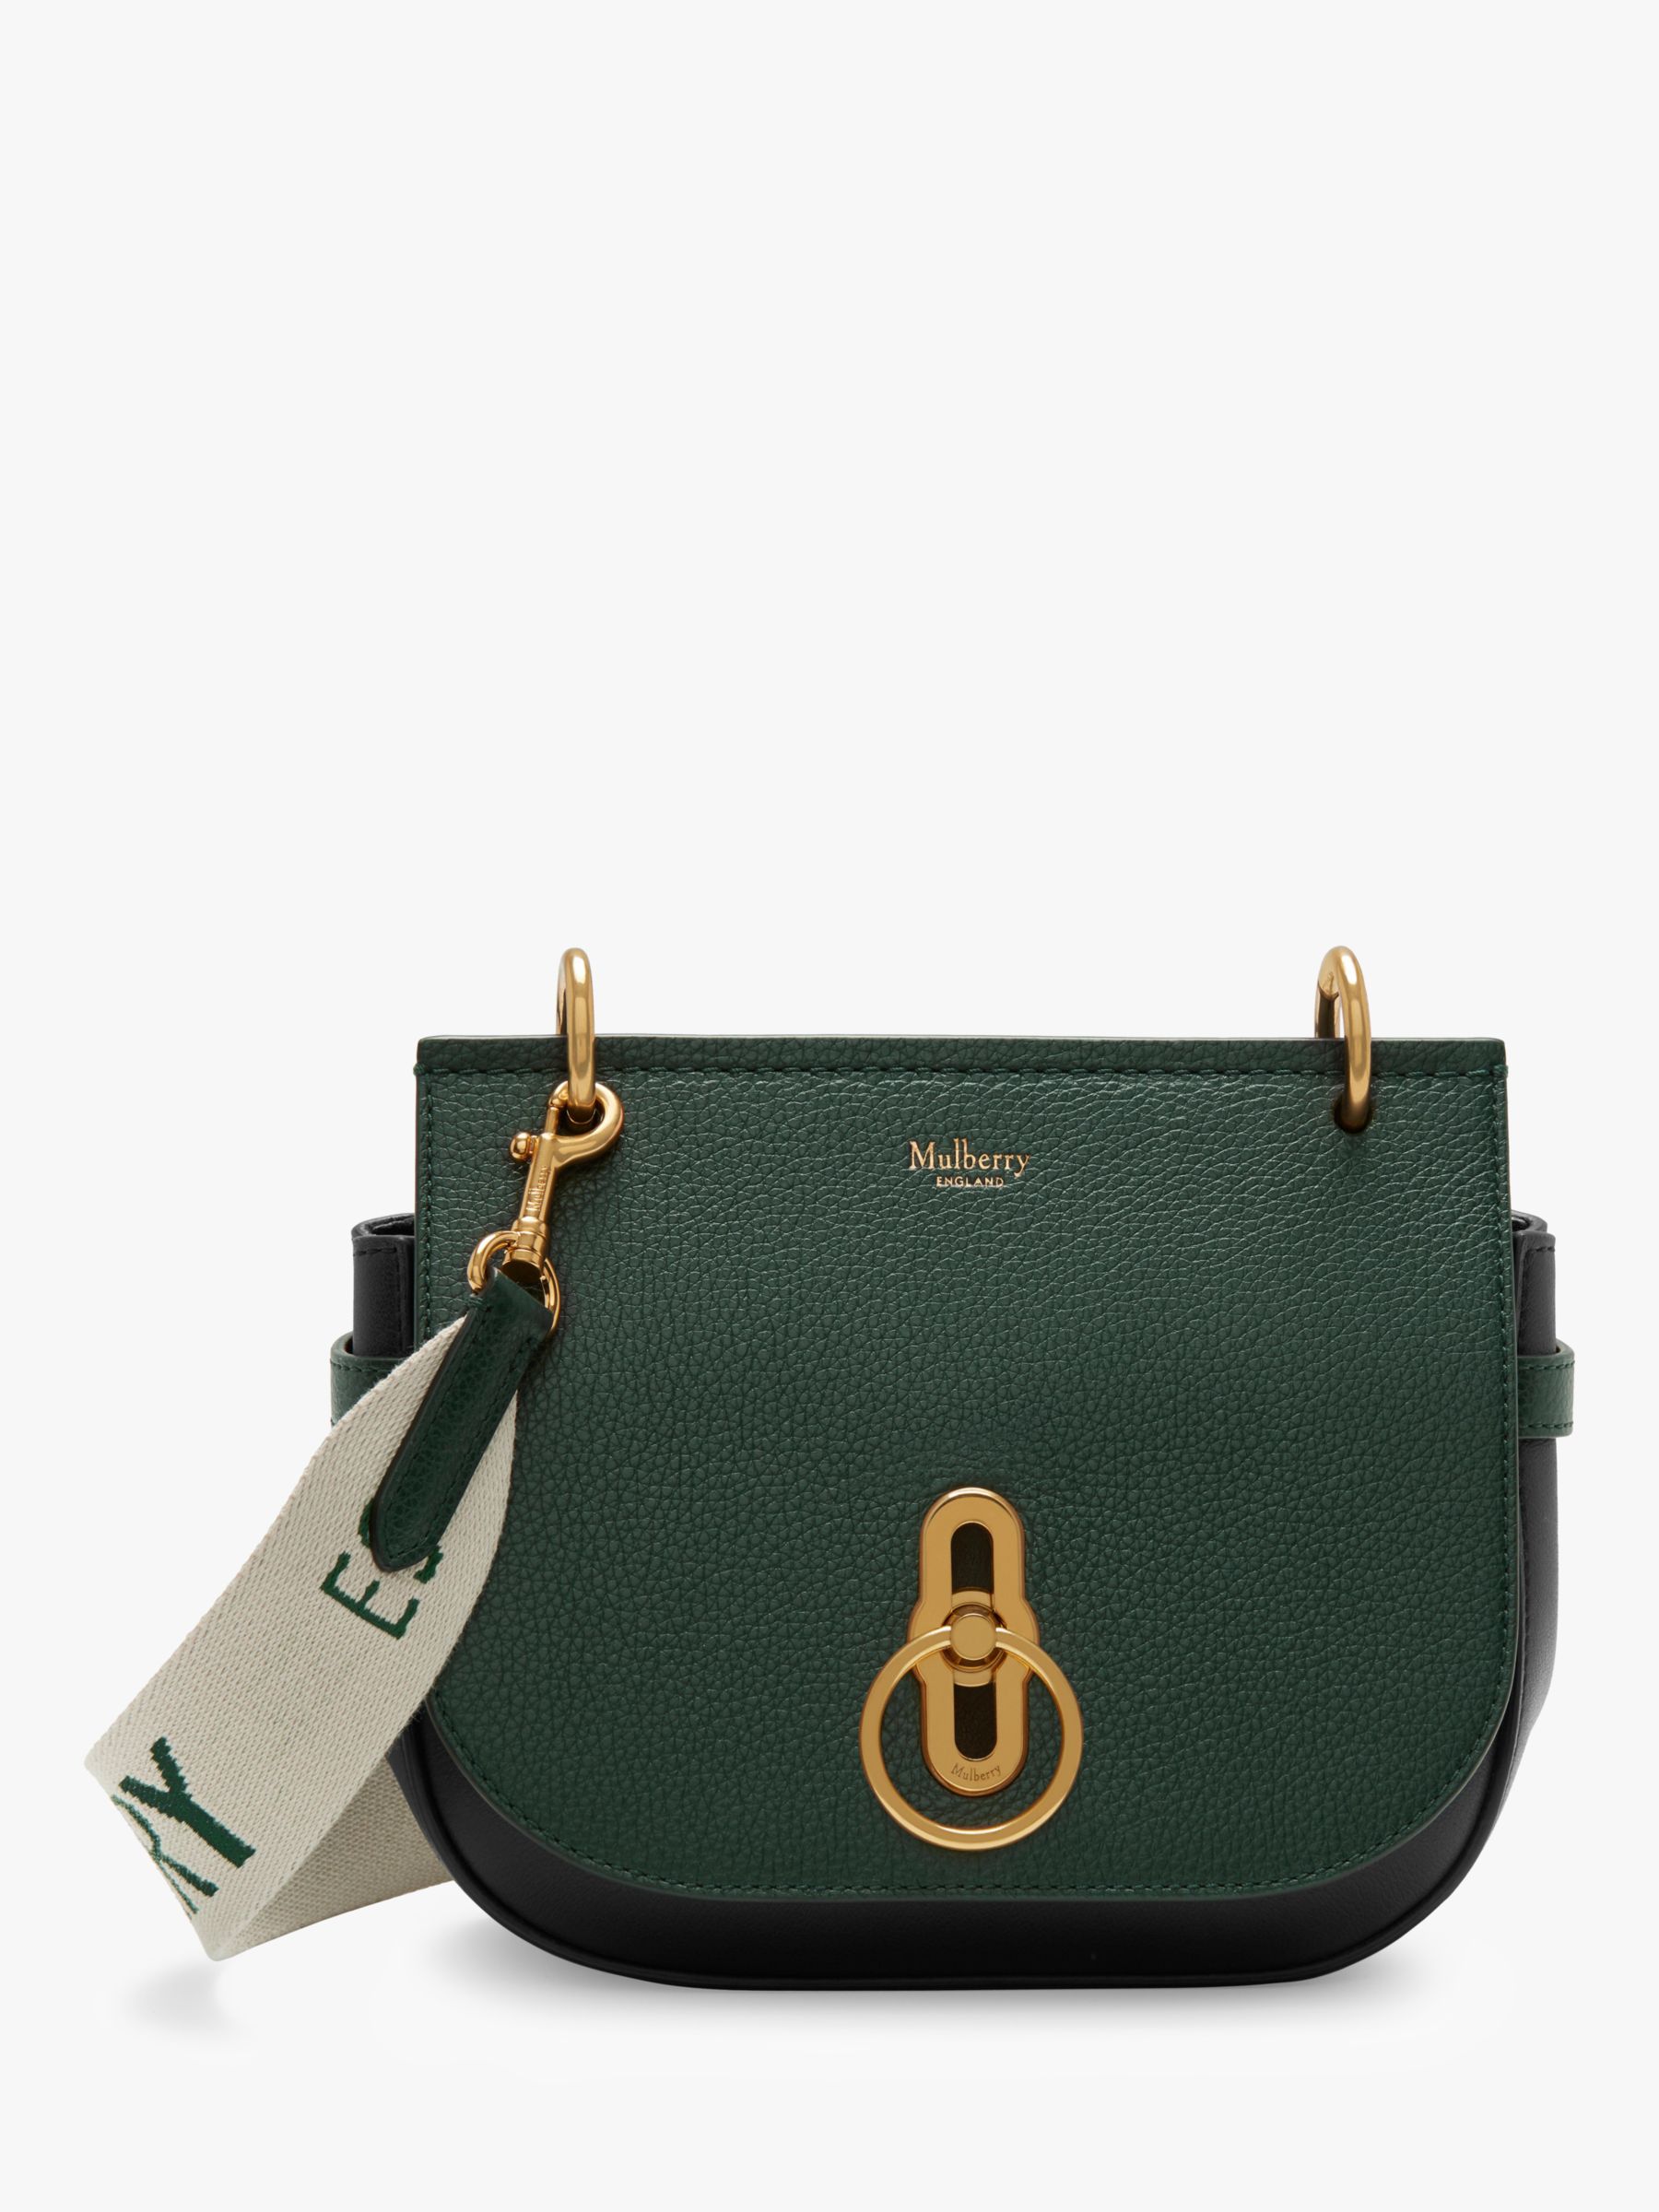 Mulberry Amberley Small Classic Grain Leather Satchel, Mulberry Green